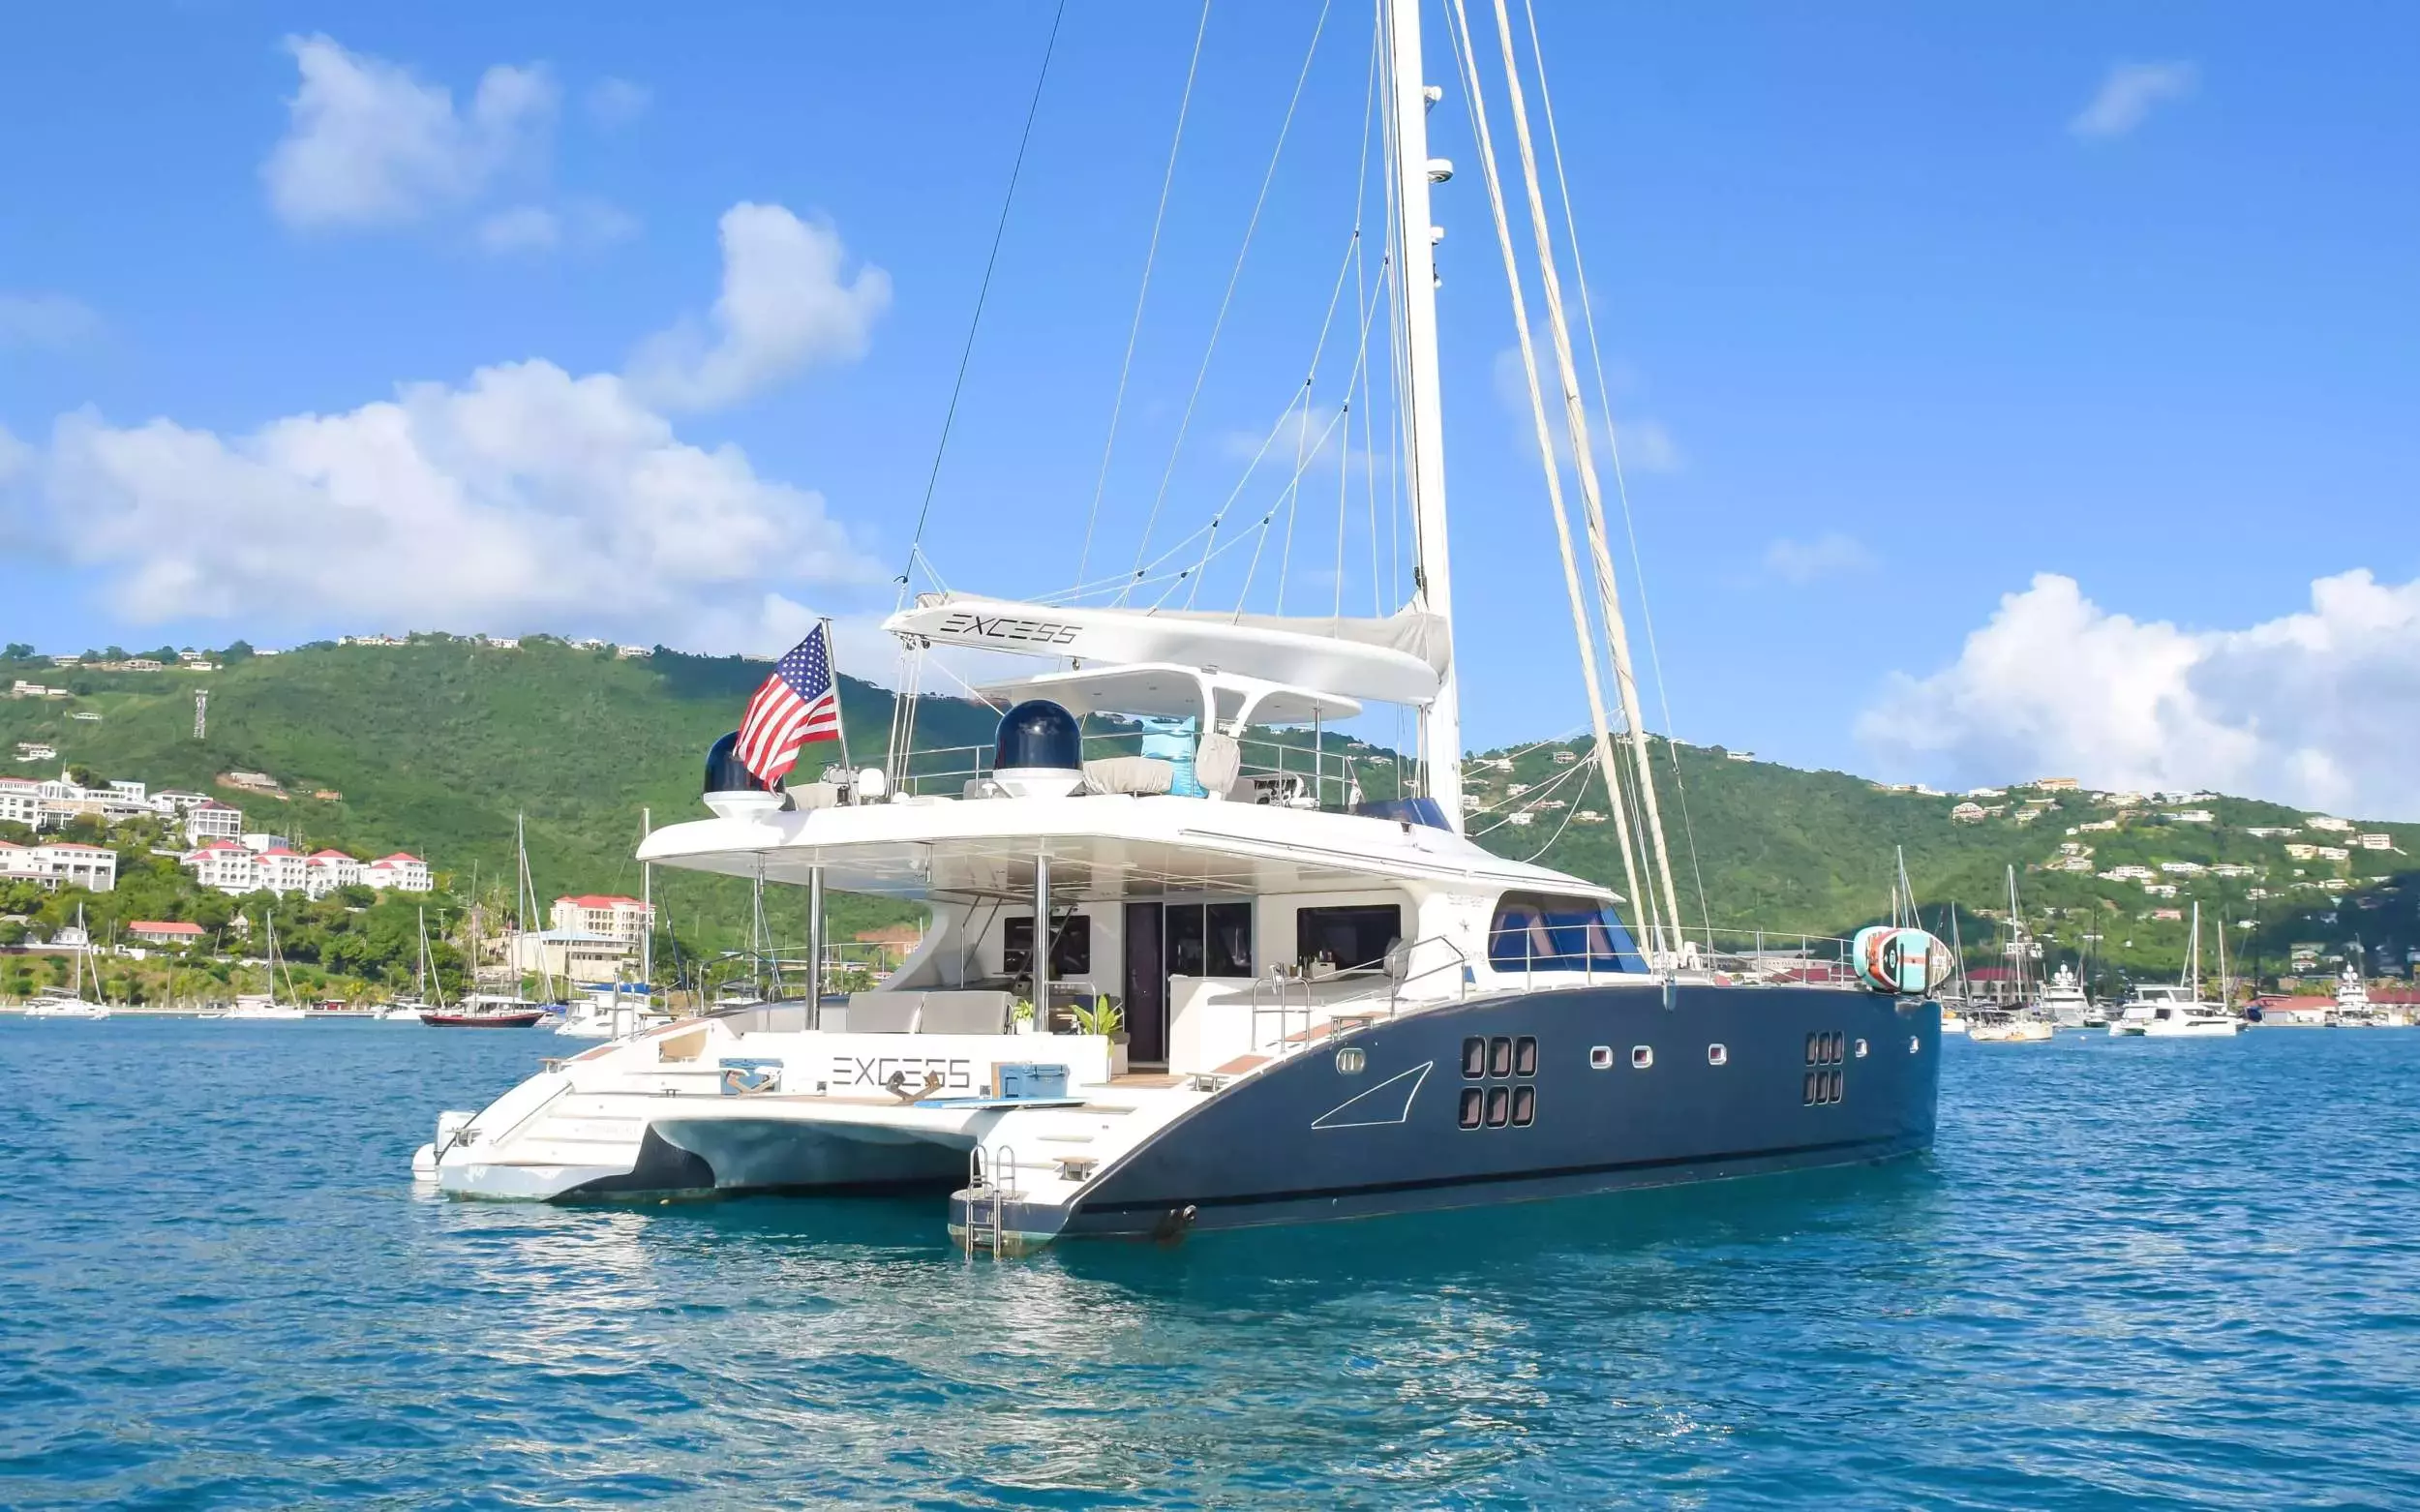 Excess by Sunreef Yachts - Top rates for a Charter of a private Luxury Catamaran in Puerto Rico